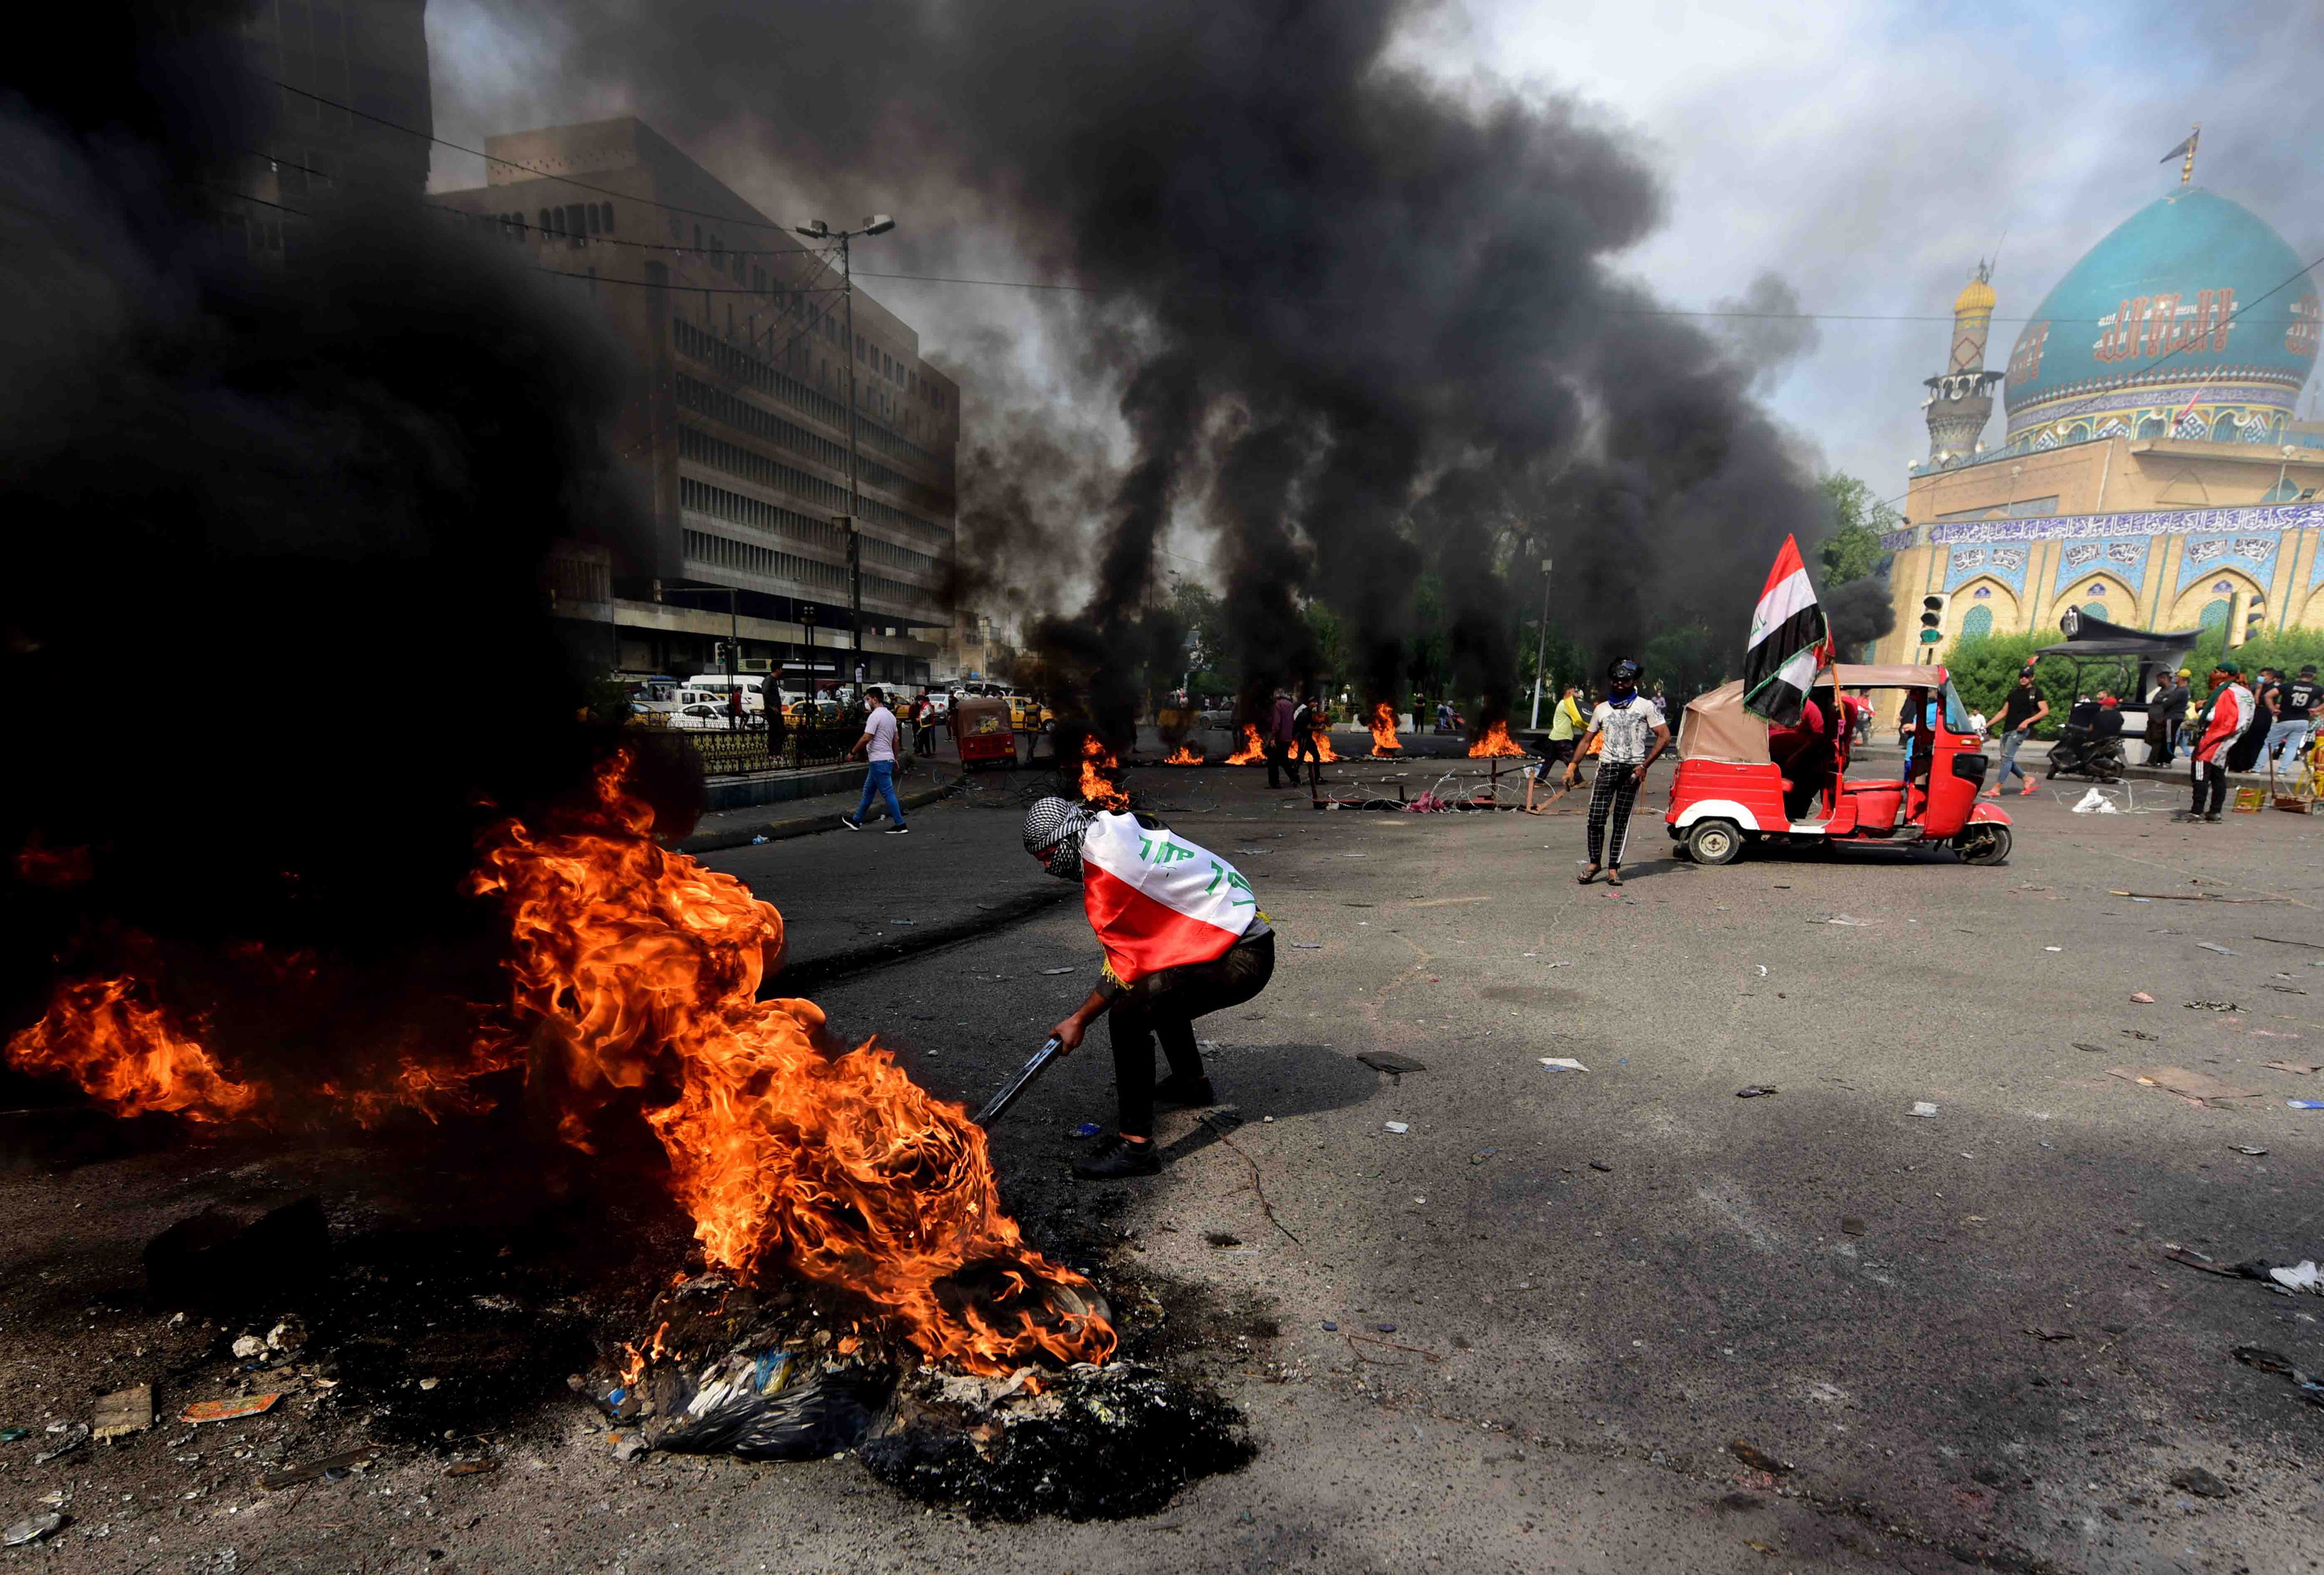 epa07969460 Iraqi protesters set fire to car tires to block a street during a protest and strike at Khillani square in central Baghdad, Iraq, 03 November 2019. Thousands of Iraqi teachers and university students participated in a strike and hundreds of protesters closed the roads in Baghdad as part of the wave of protests across the country, against the Iraqi government corruption, in response to the call of Iraqi Teachers Union and activists.  EPA/MURTAJA LATEEF